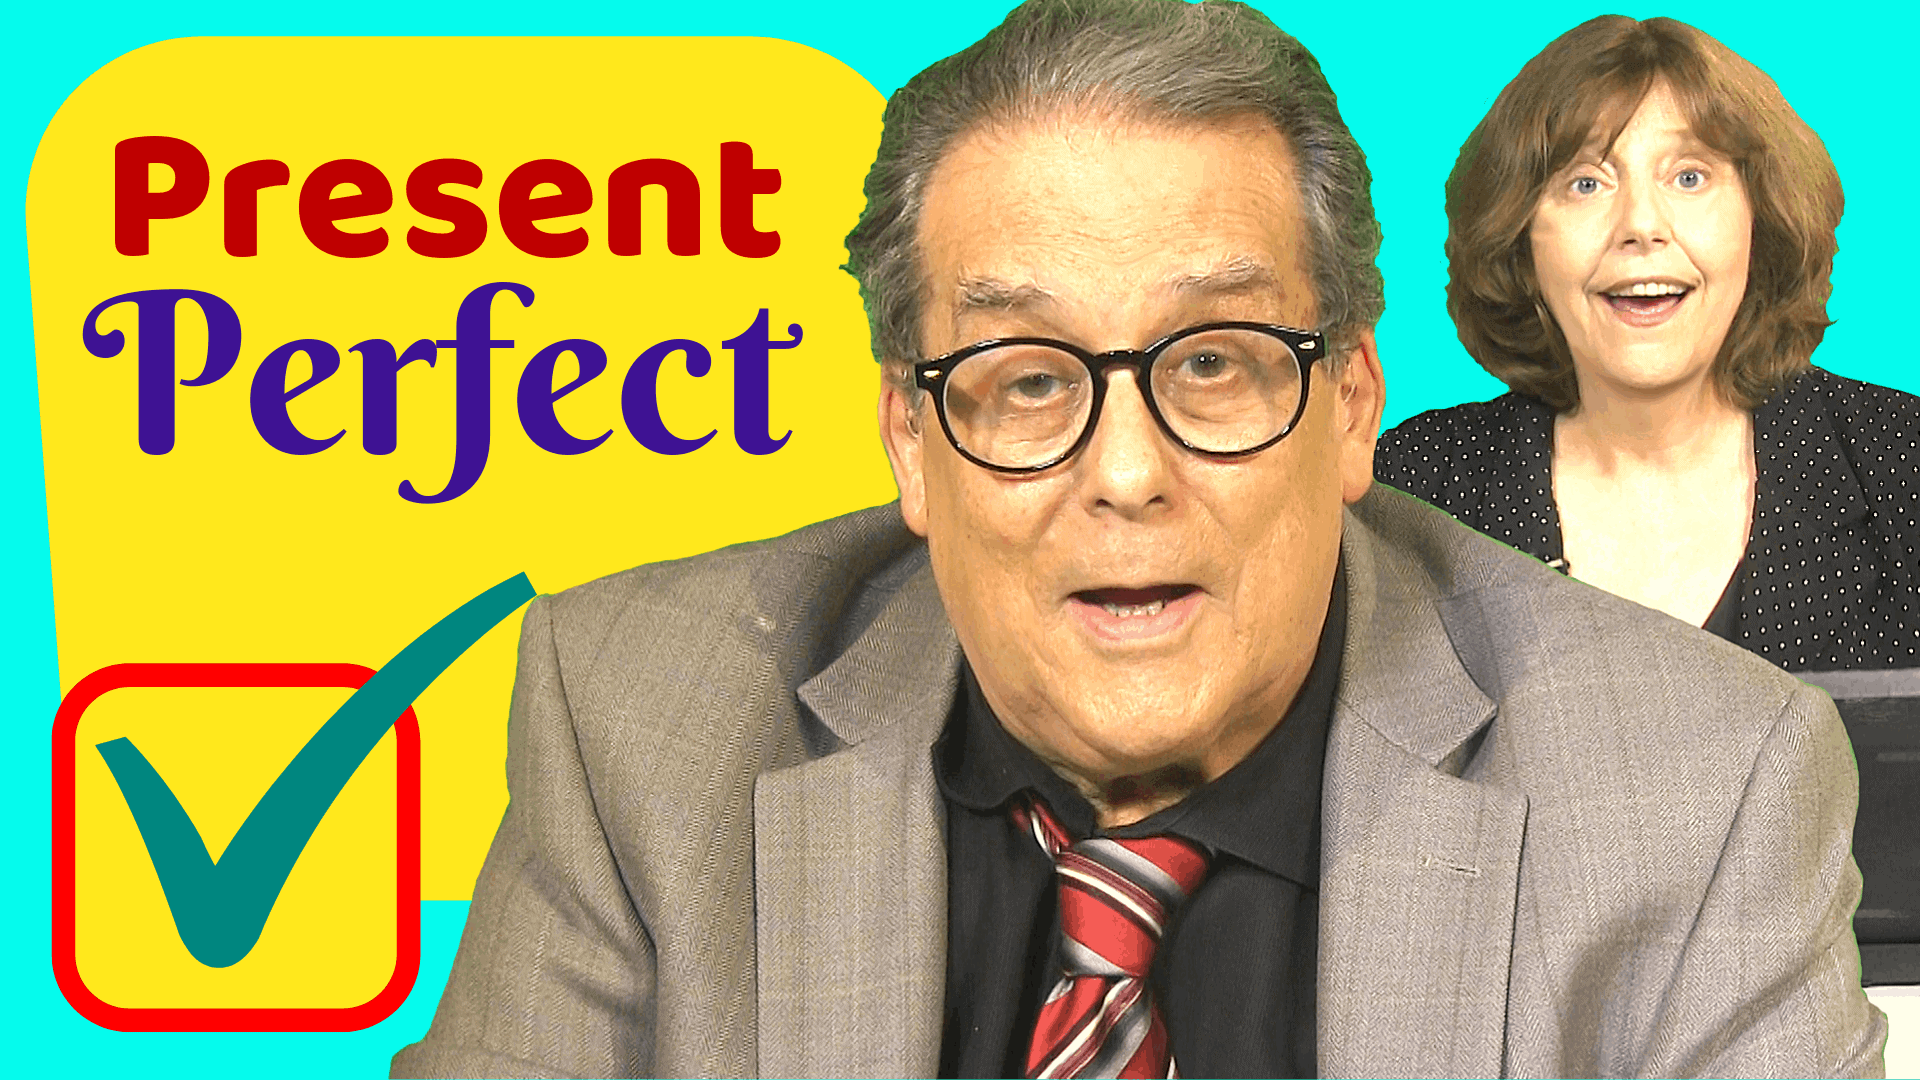 Present Perfect in English 3 uses